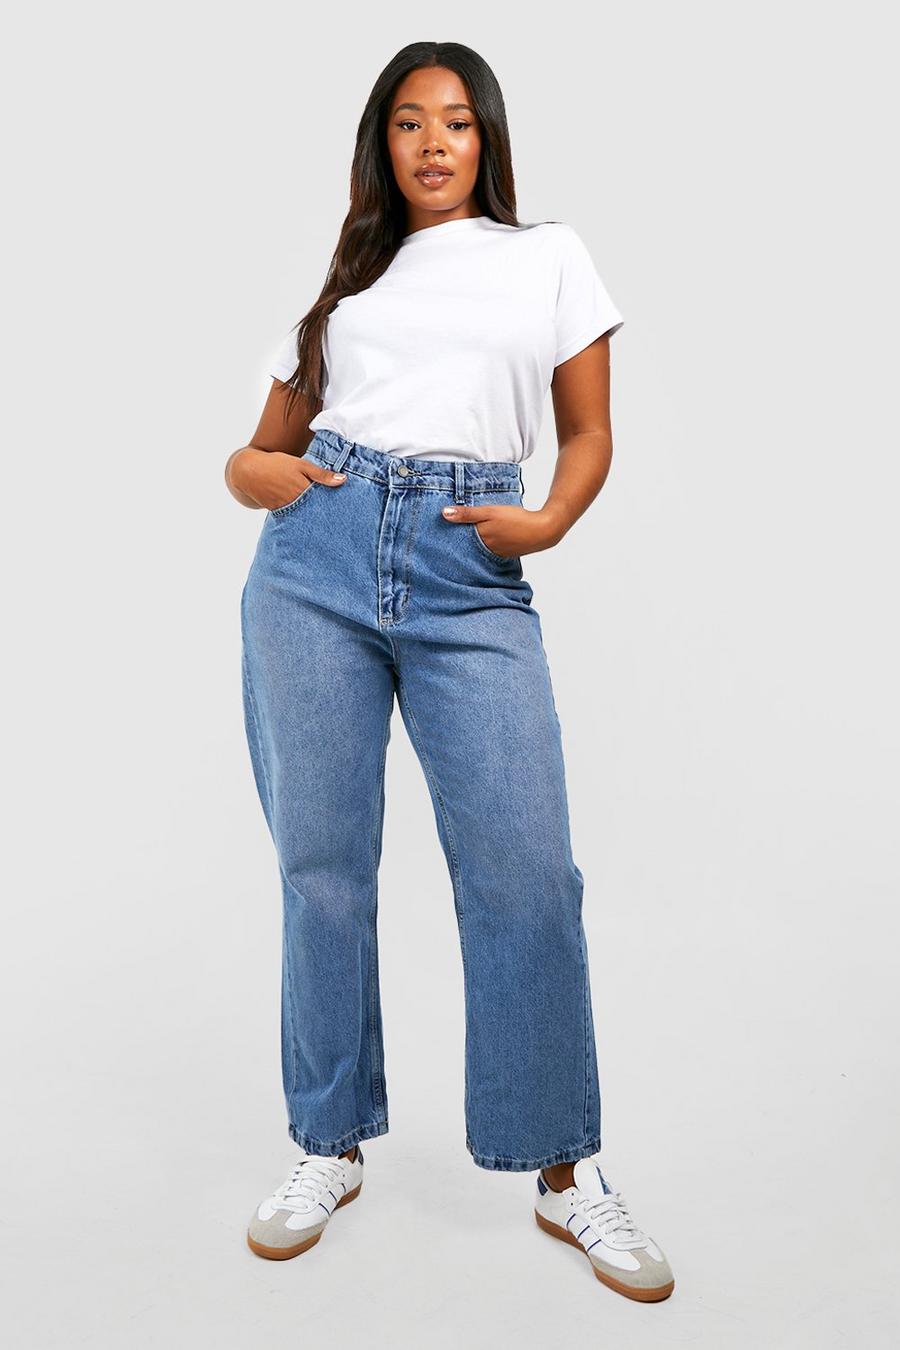 Buy Highly Desirable High Rise Slim Straight Leg Jeans Plus Size